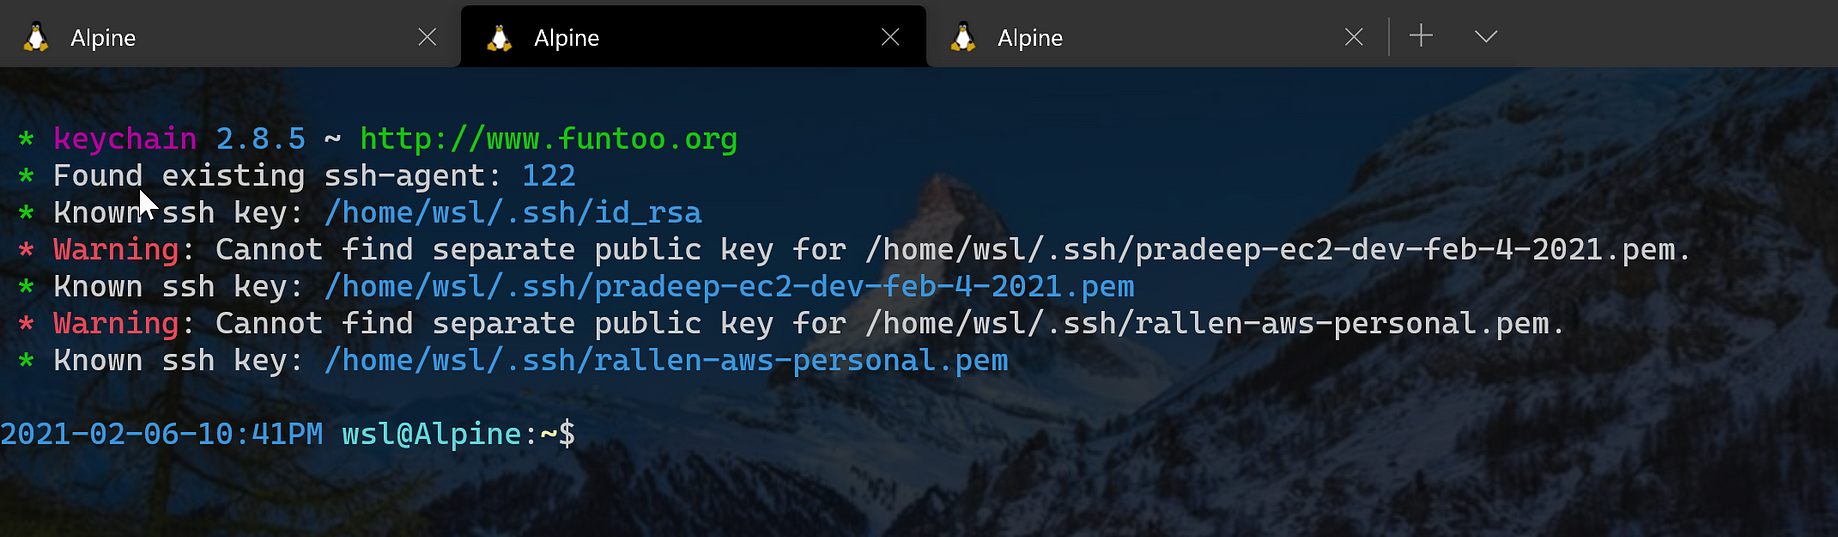 Keychain: Manage SSH Agent Sessions in Alpine Linux | by Callback Insanity  | Medium